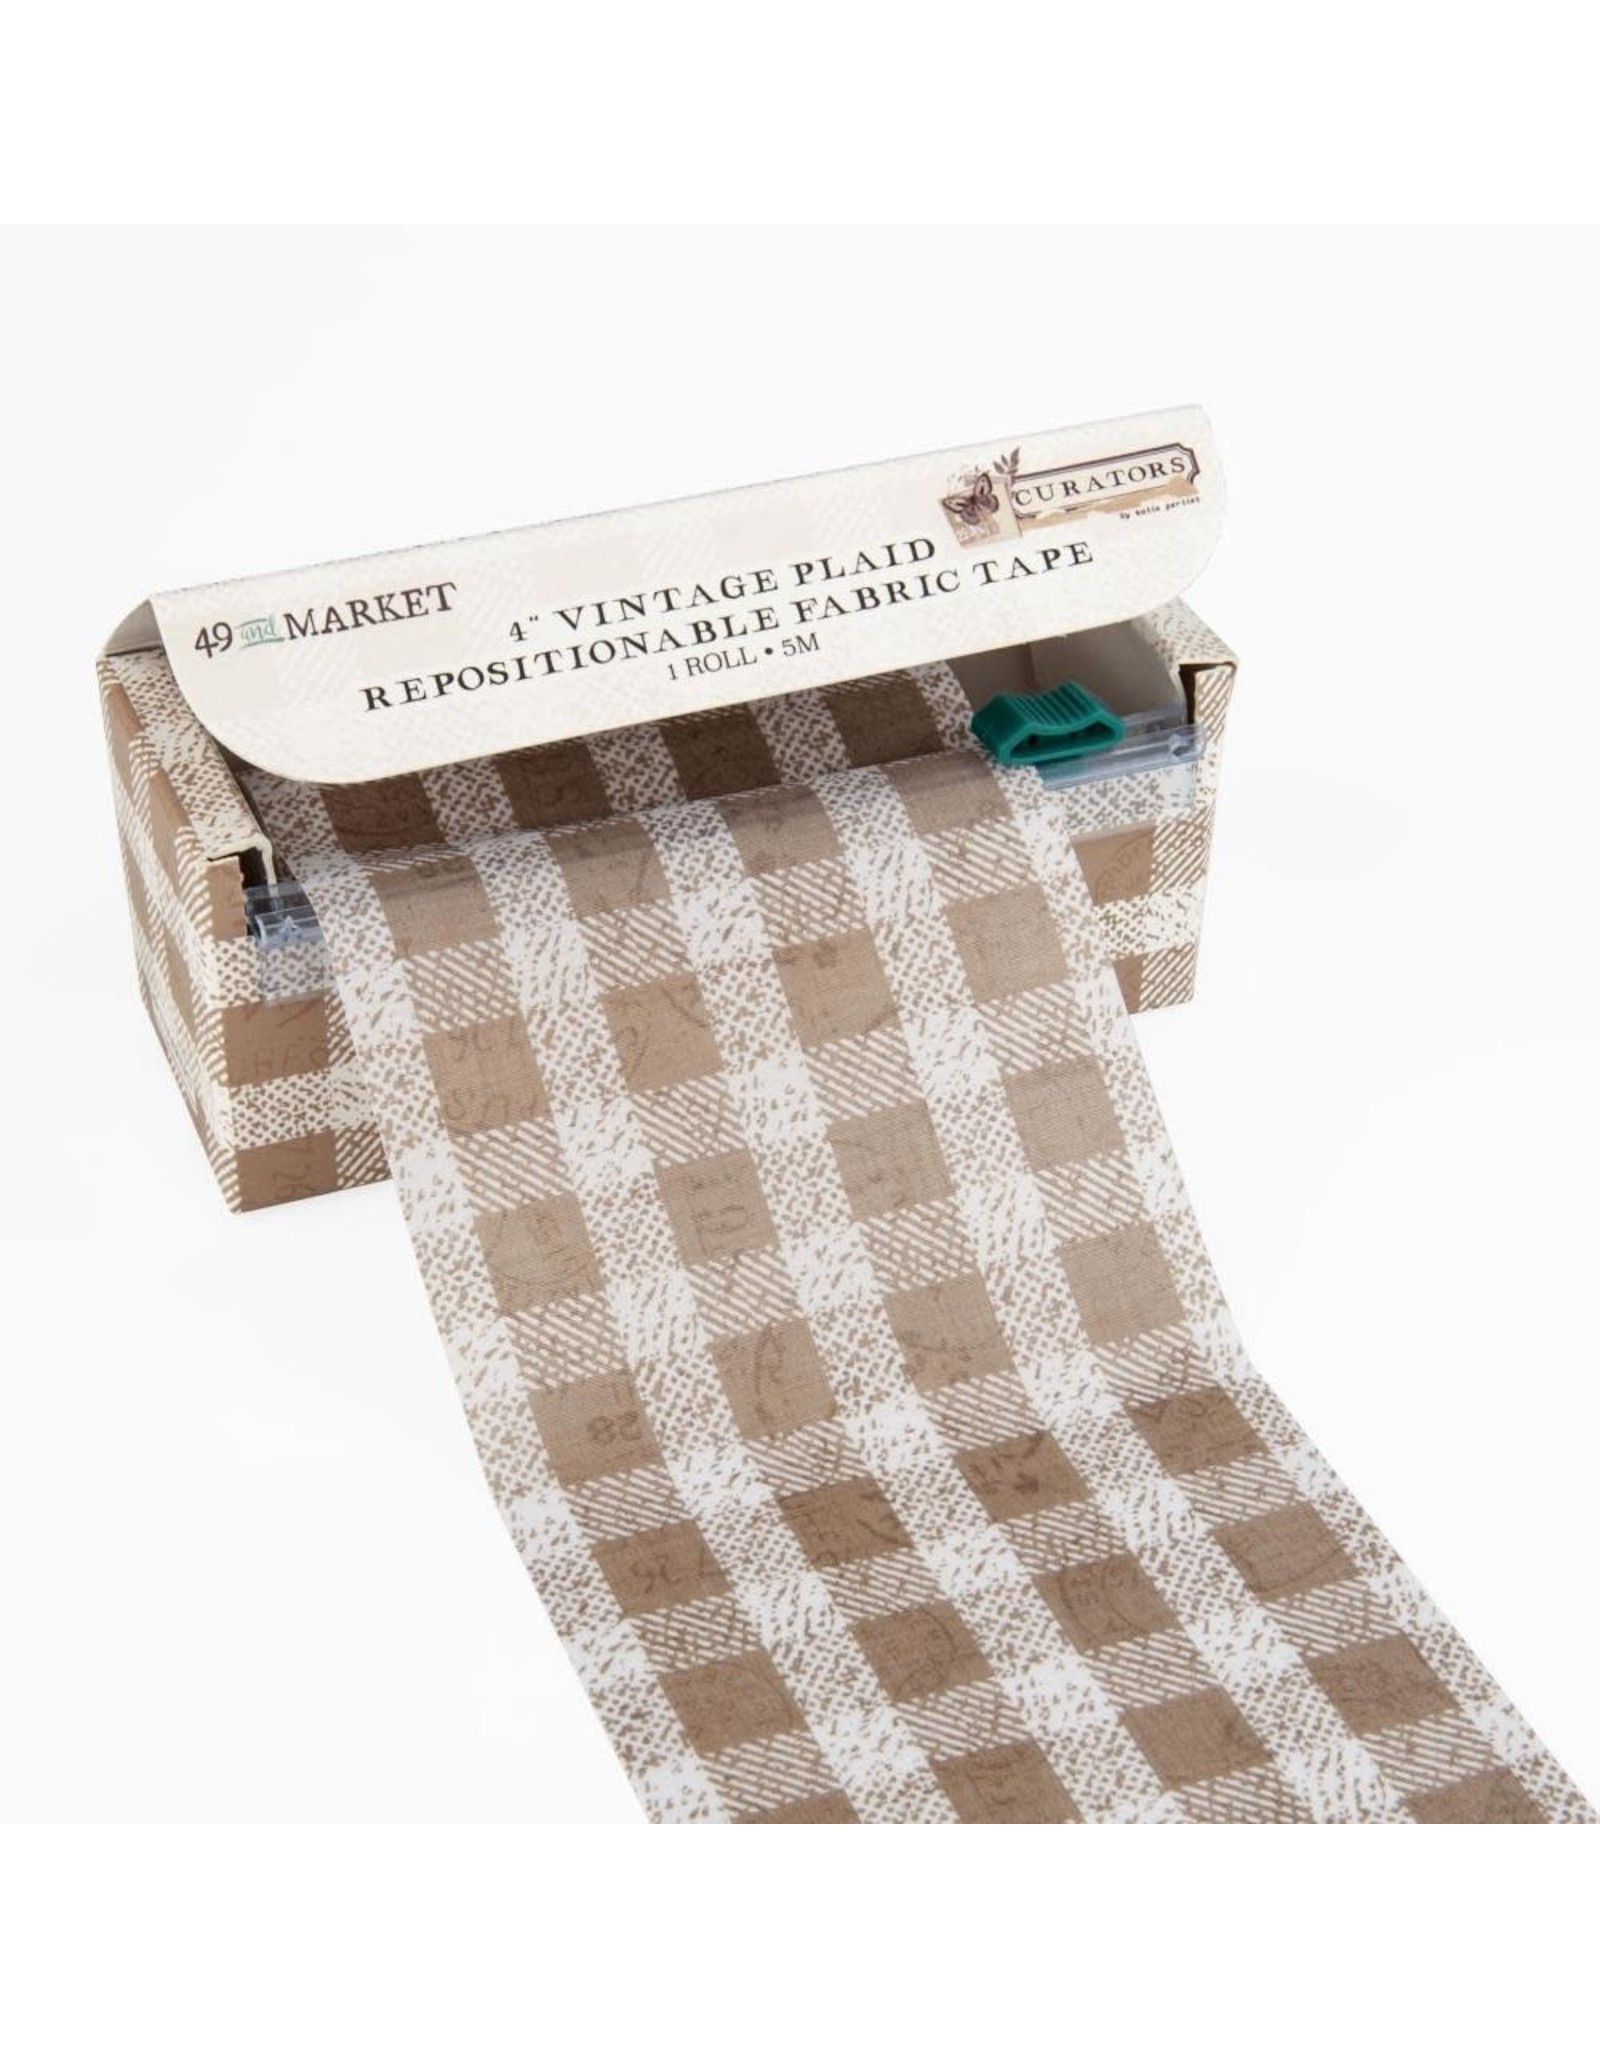 49 AND MARKET 49 AND MARKET CURATORS VINTAGE PLAID 4" REPOSITIONABLE FABRIC TAPE